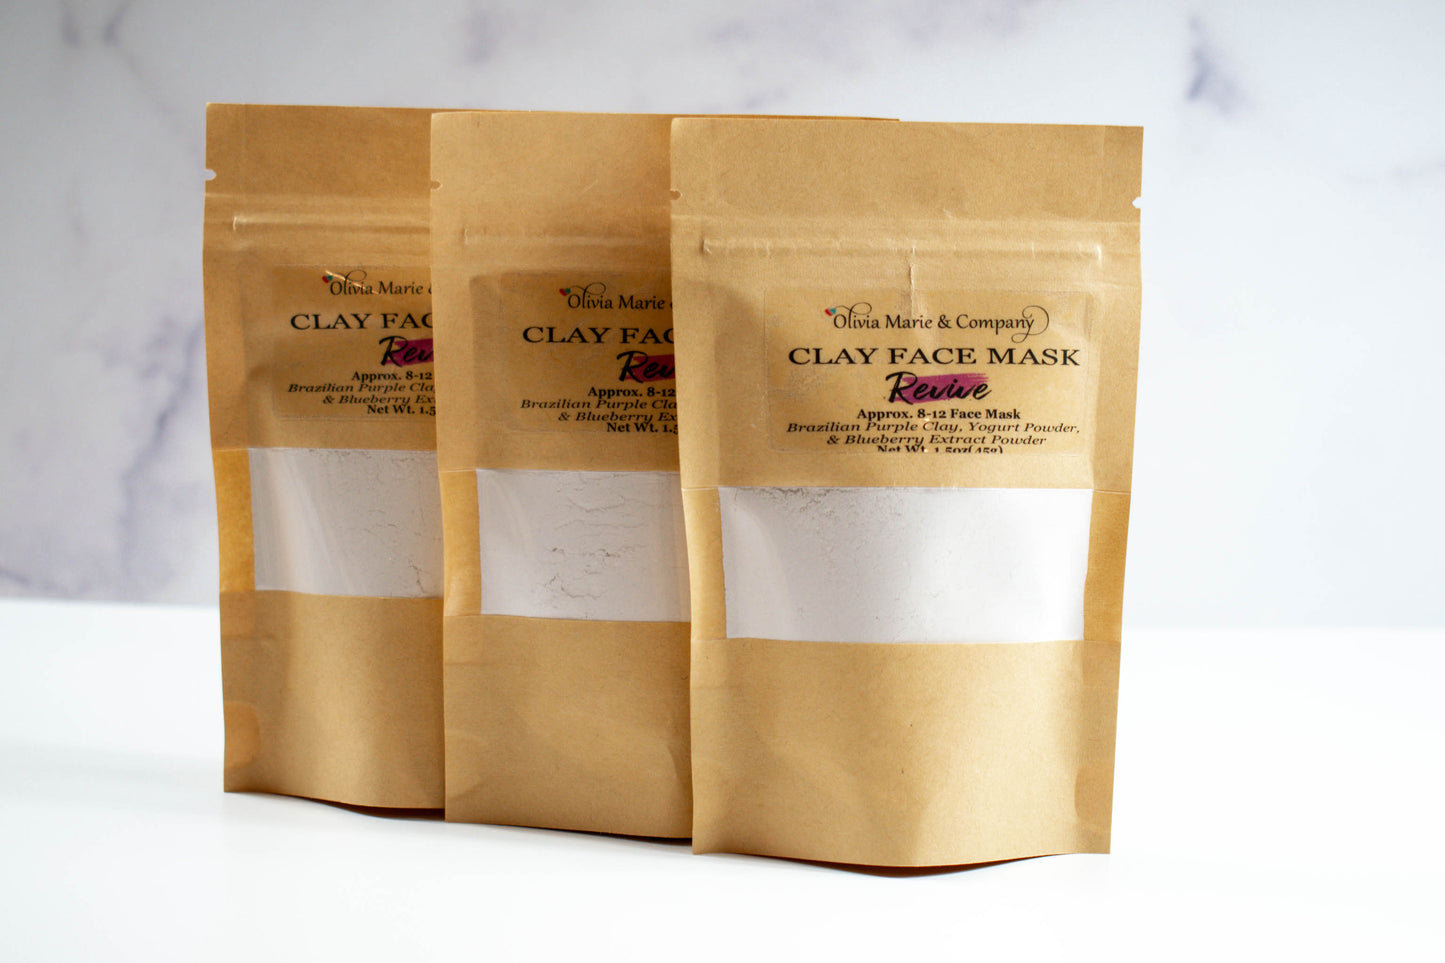 Purple clay mask in brown bag with clear window.